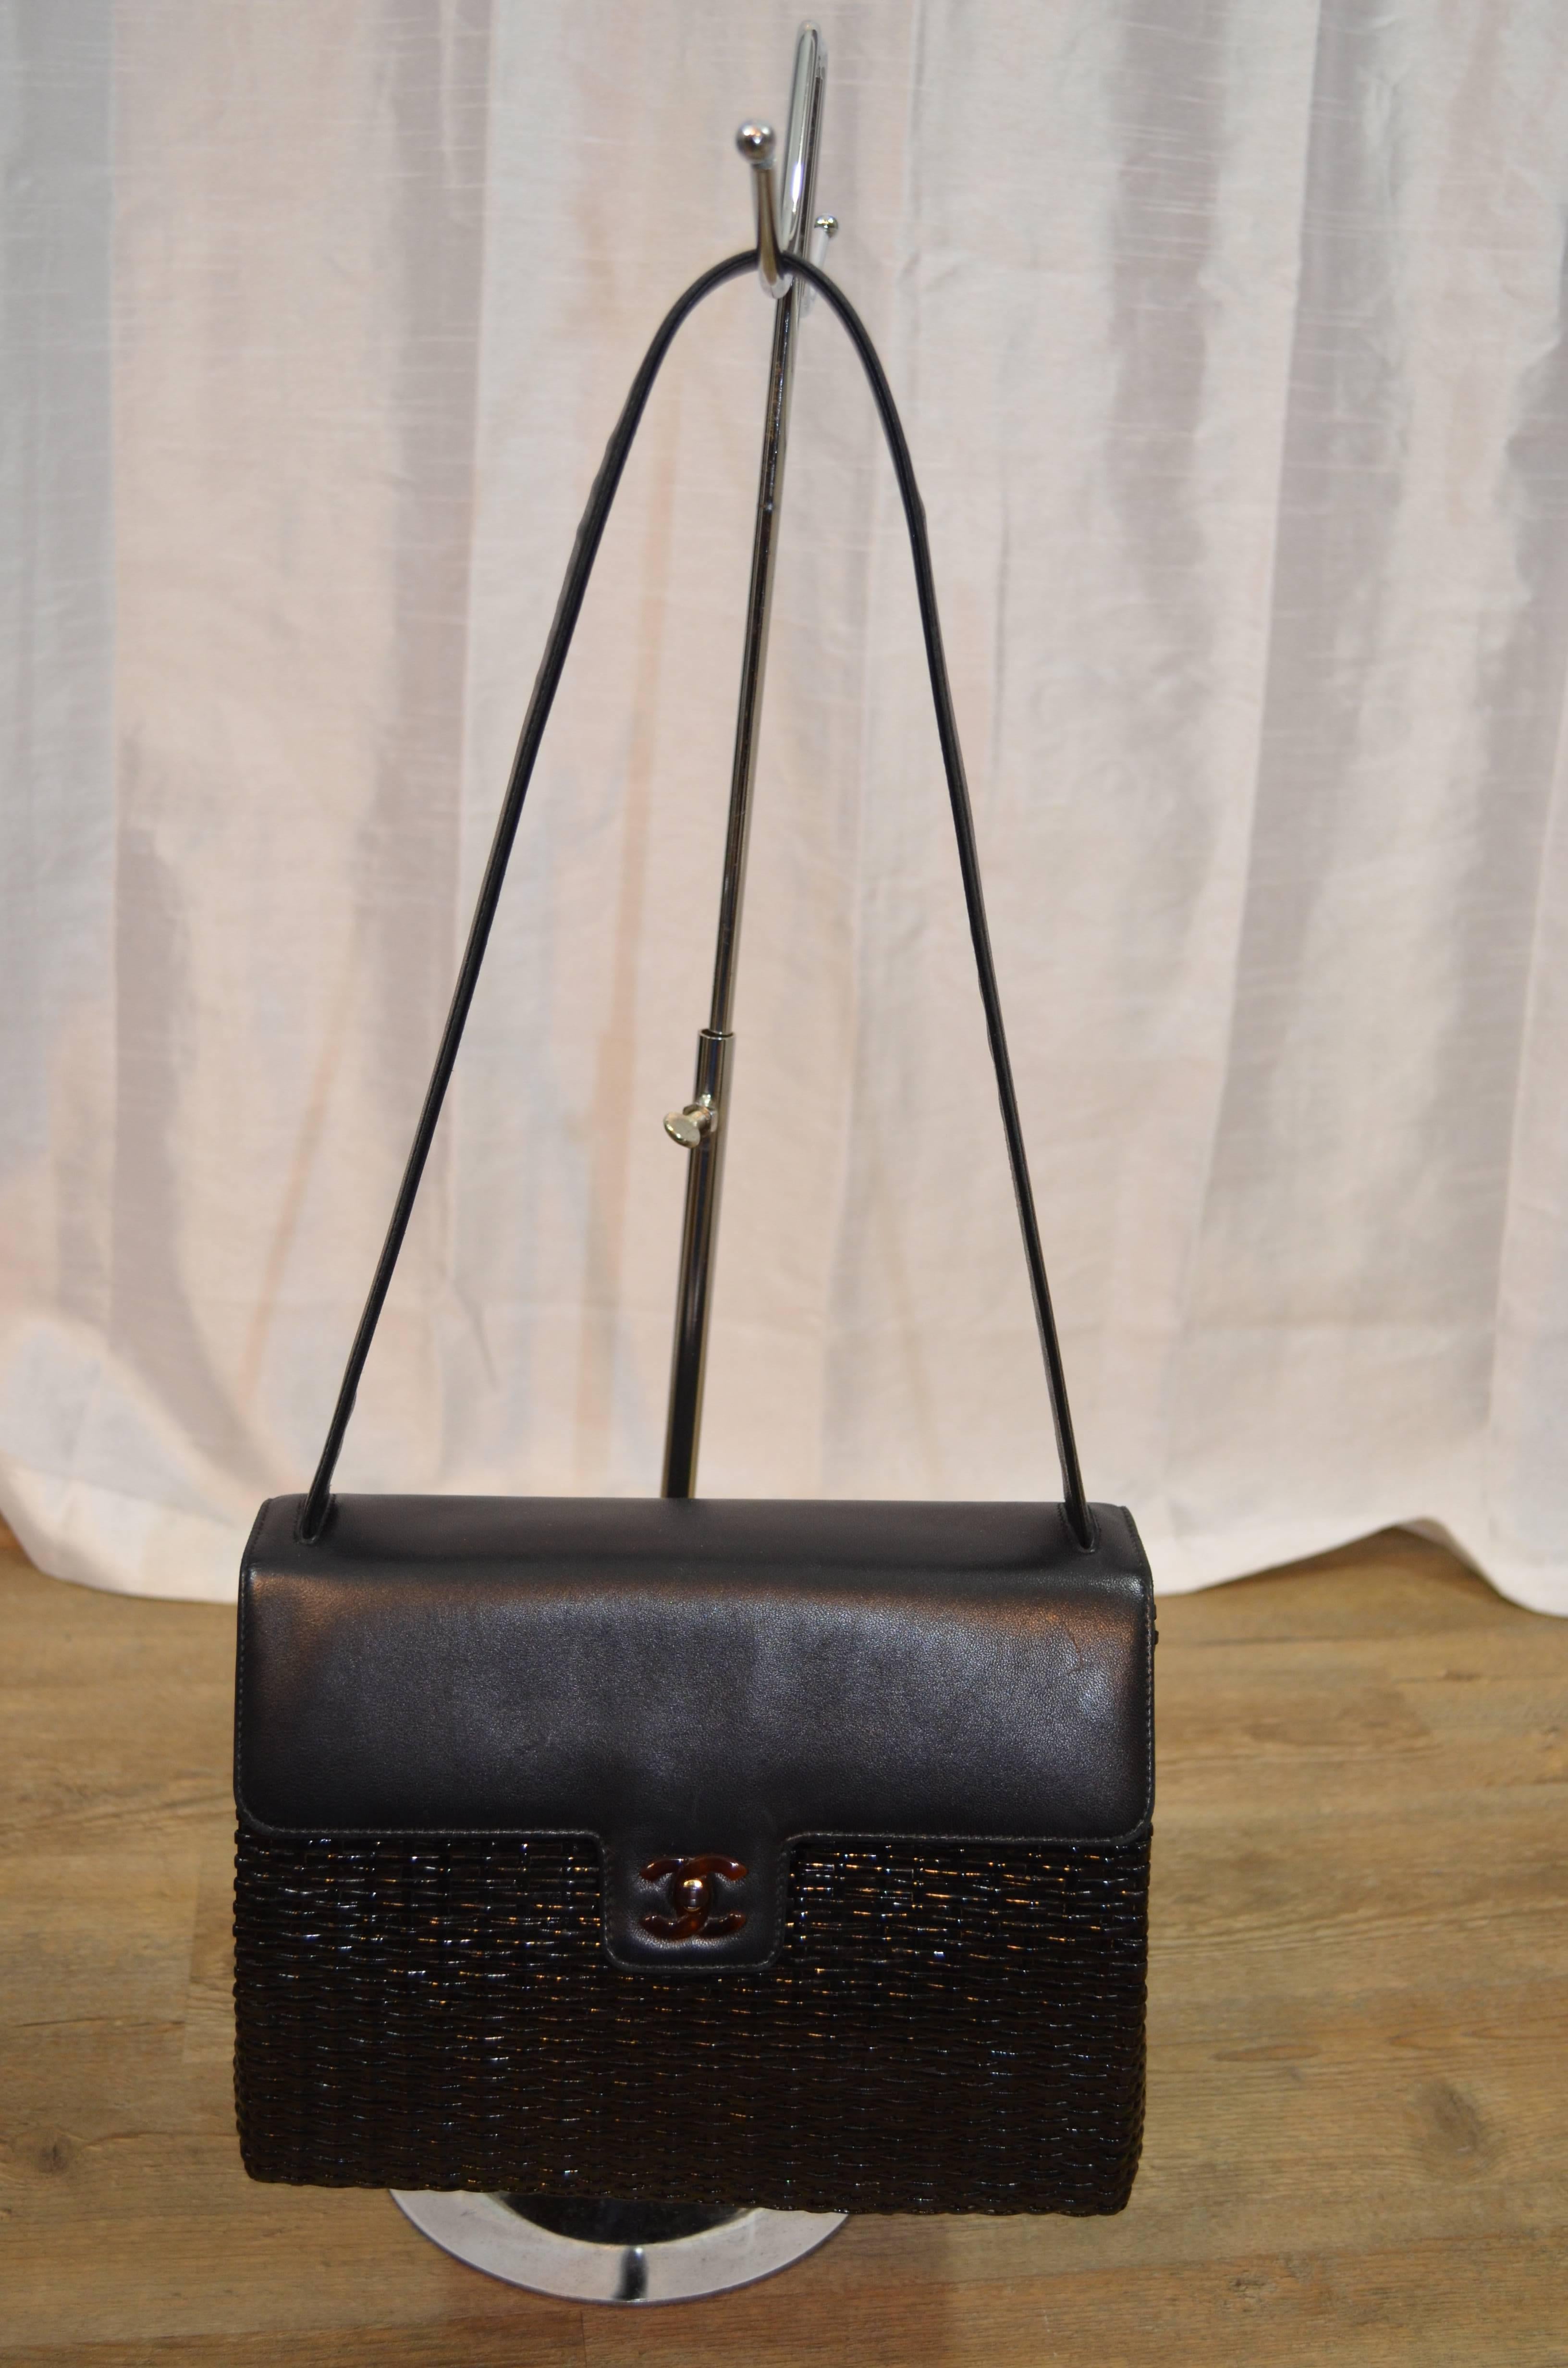 Chanel woven coated wicker and leather black box handbag with tortoise CC turnlock closure. Leather flap and leather shoulder strap. Fabric lining and 1 zipper pocket. Includes dustbin and serial number sticker. Overall excellent condition with wear